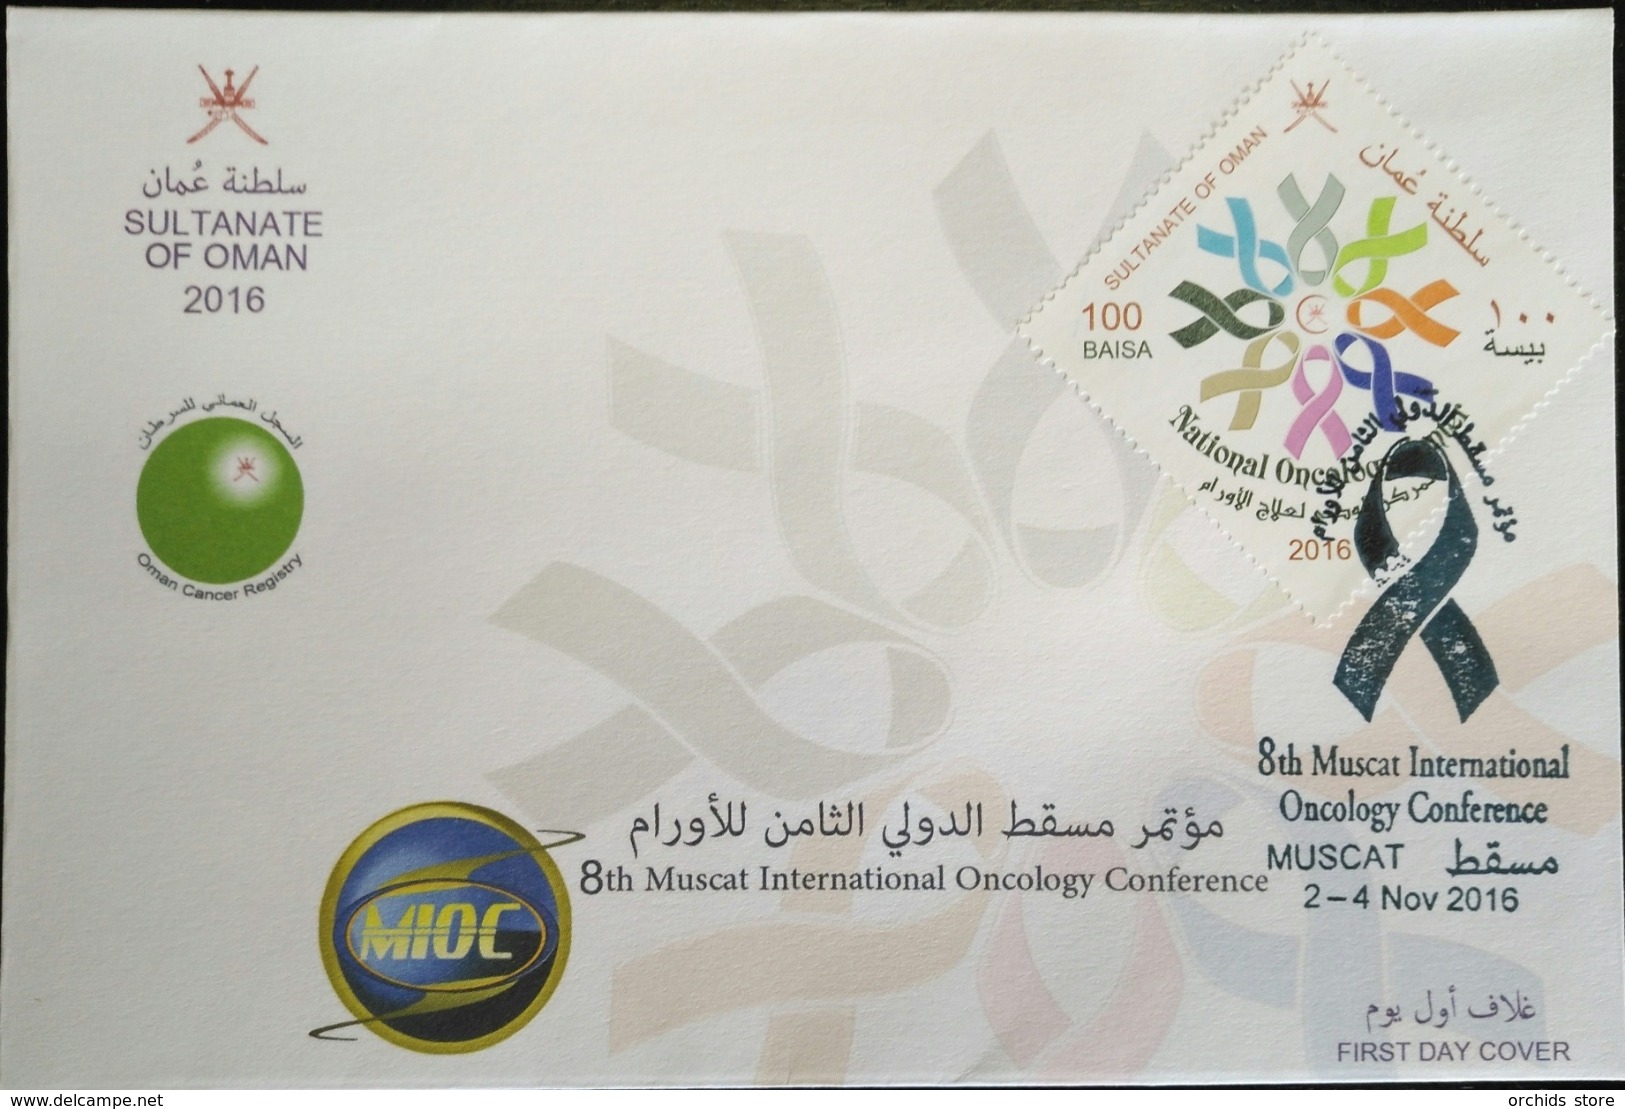 Sultanate Of Oman 2016 FDC - 8th Muscat International Oncology Conference - Oman